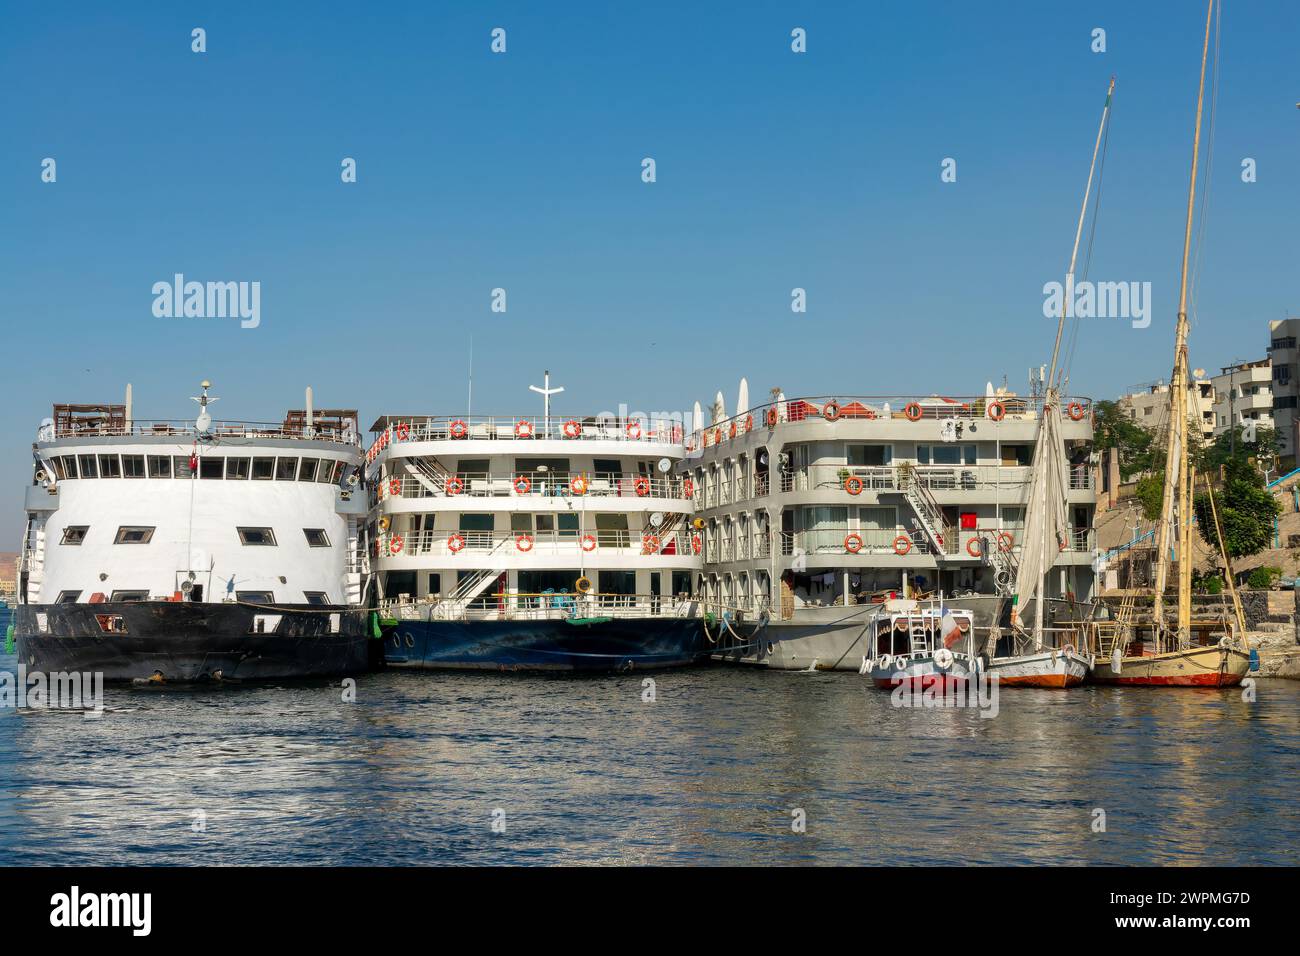 Several Nile river large cruise boats side by side at the dock in Aswan, Egypt Stock Photo